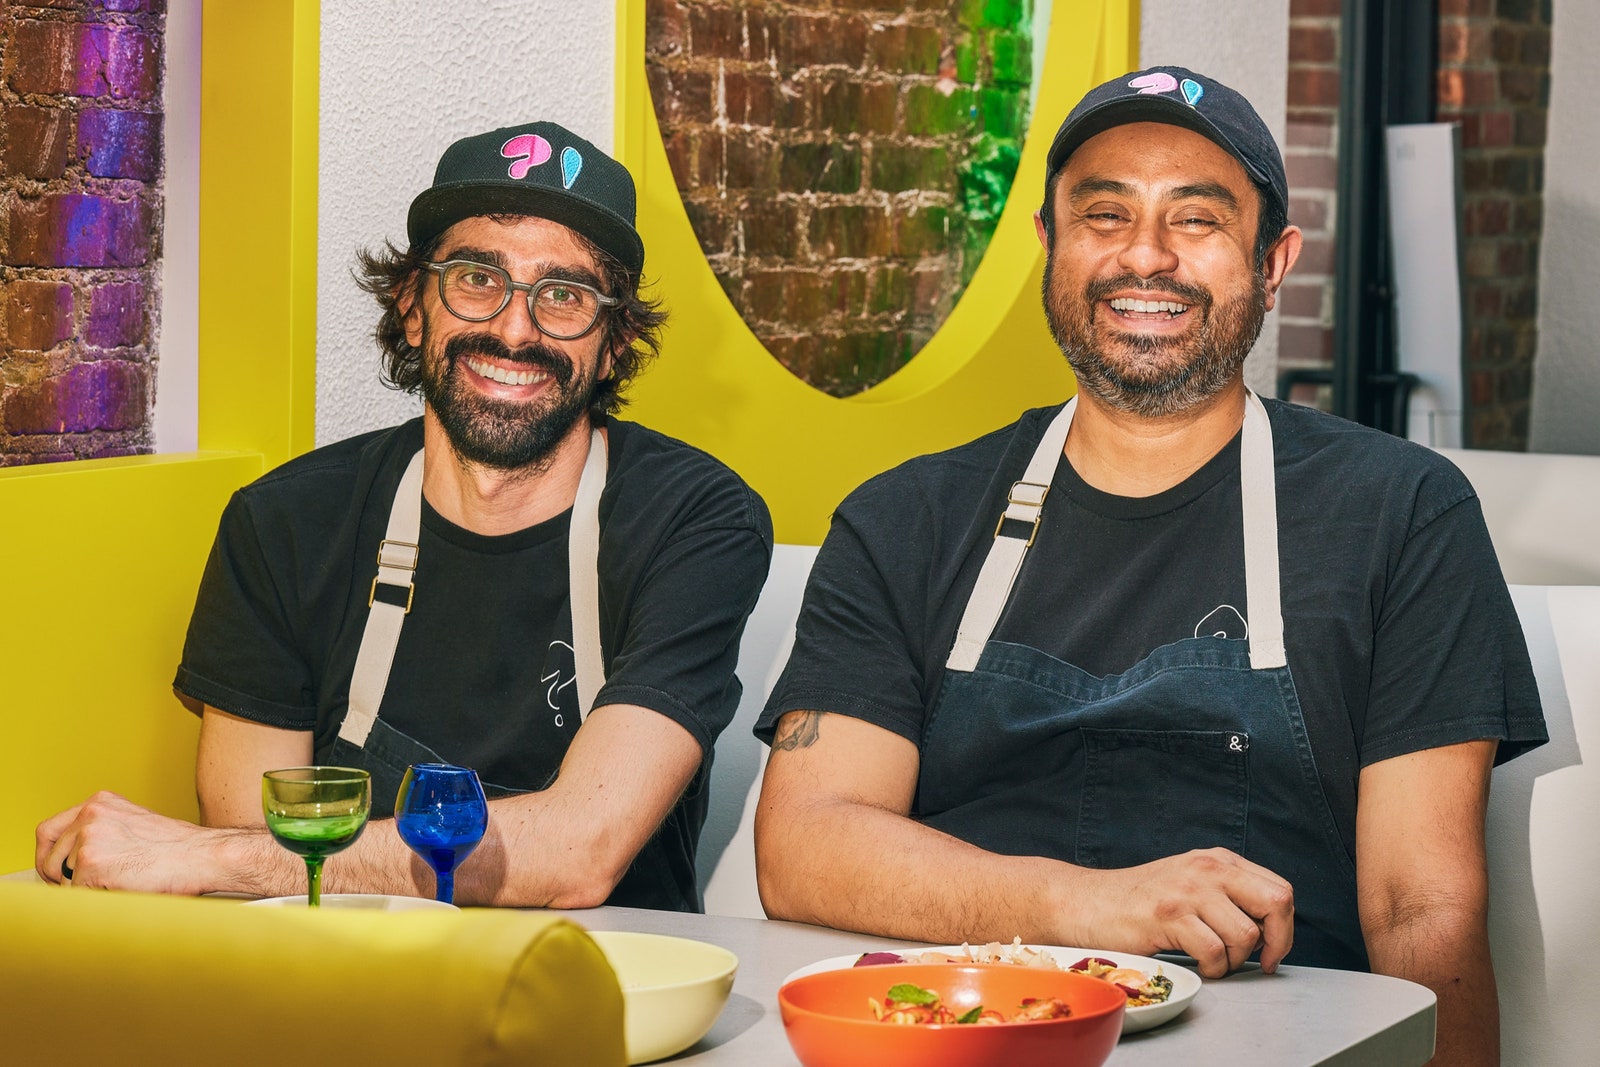 Paul DAvino and Jorge Olarte are the coowners and cochefs of Caf Mars.